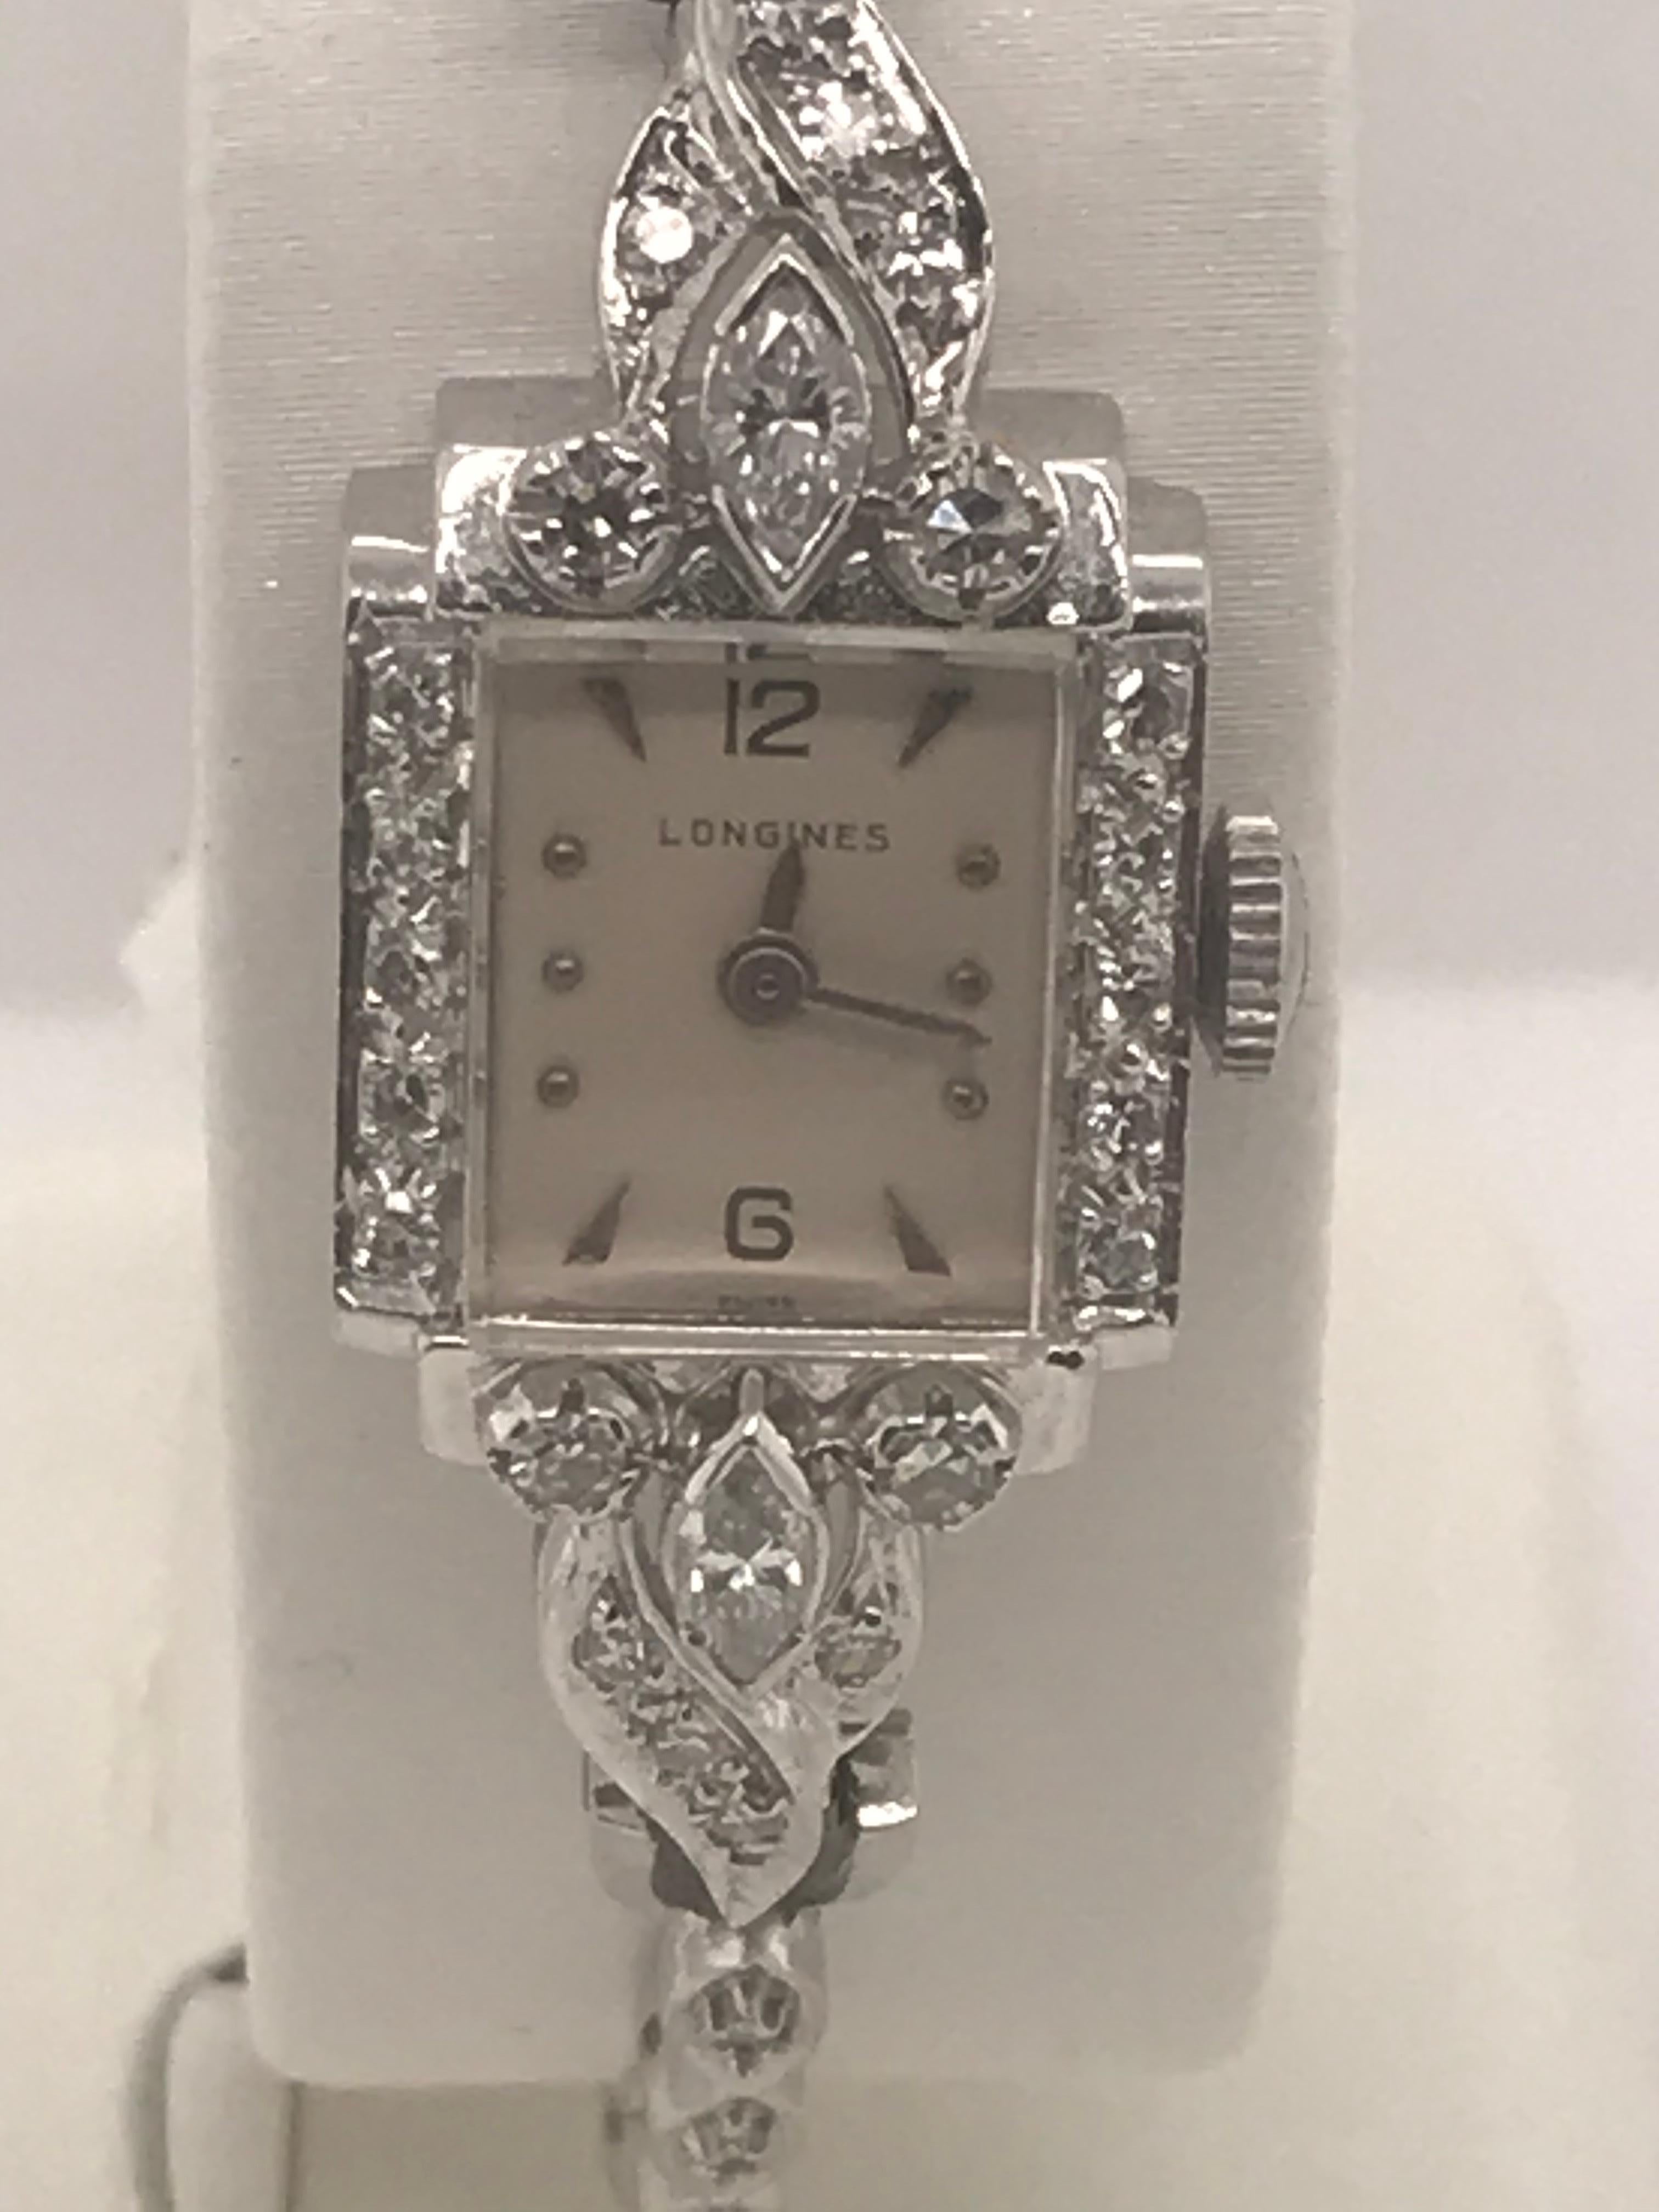 This exquisite 14K white gold Longines Wittnauer timepiece circa 1940s contains 28 single cut diamonds= .48cts and two marquise diamonds = .20cts.  It also has a 17 jewel Swiss movement with case numbers 384191, 4LLU, MX7, 11292043.   The 28 single